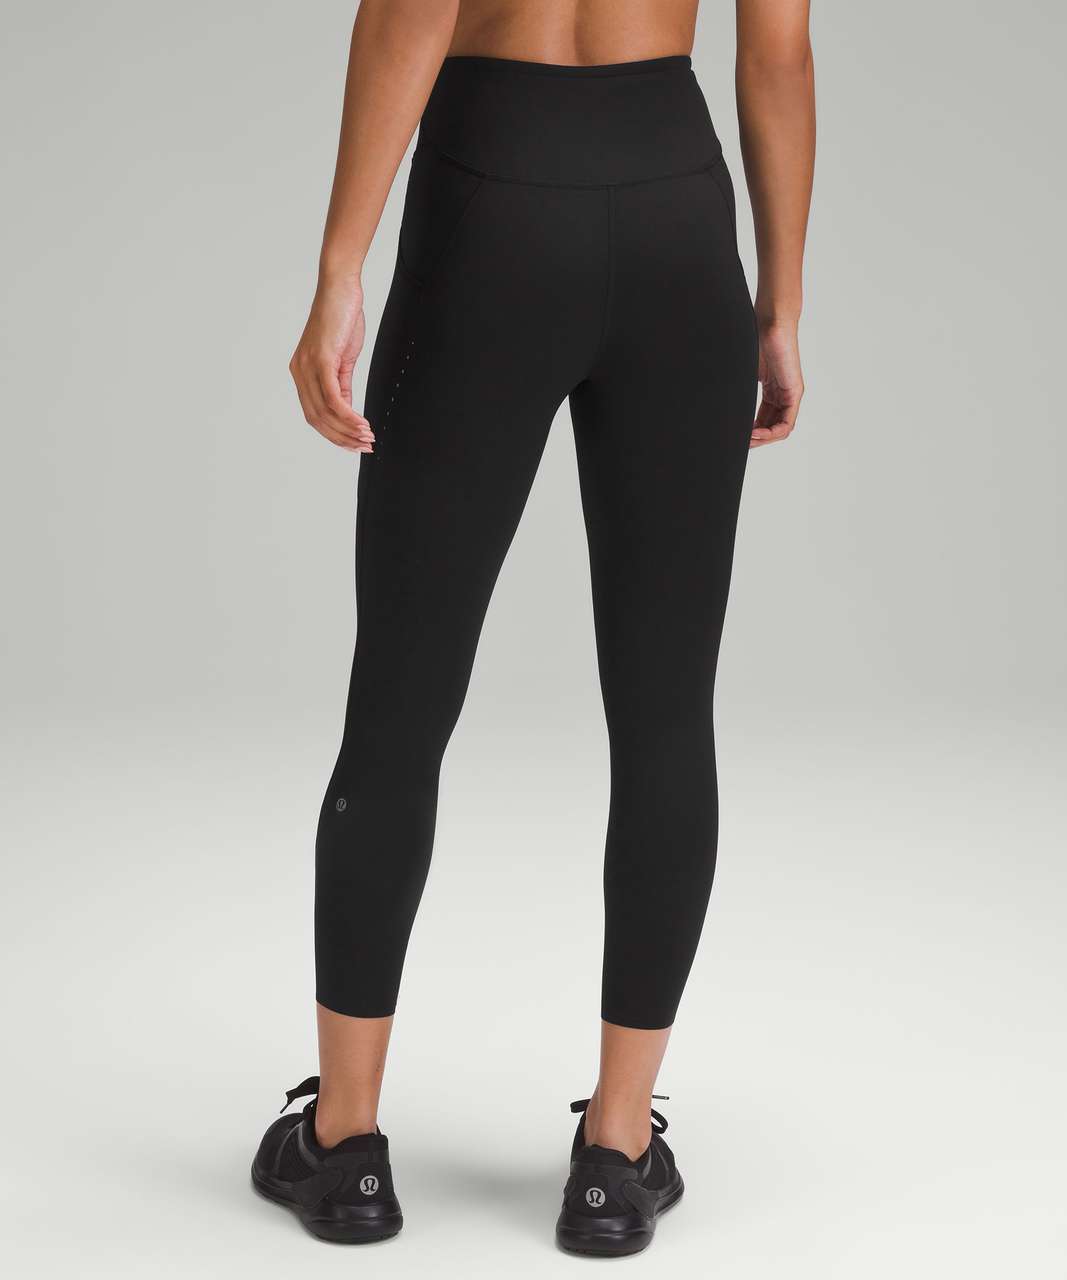 Shascullfites Lulu Black Leggings Pull On Stretch Buttons Fly Push